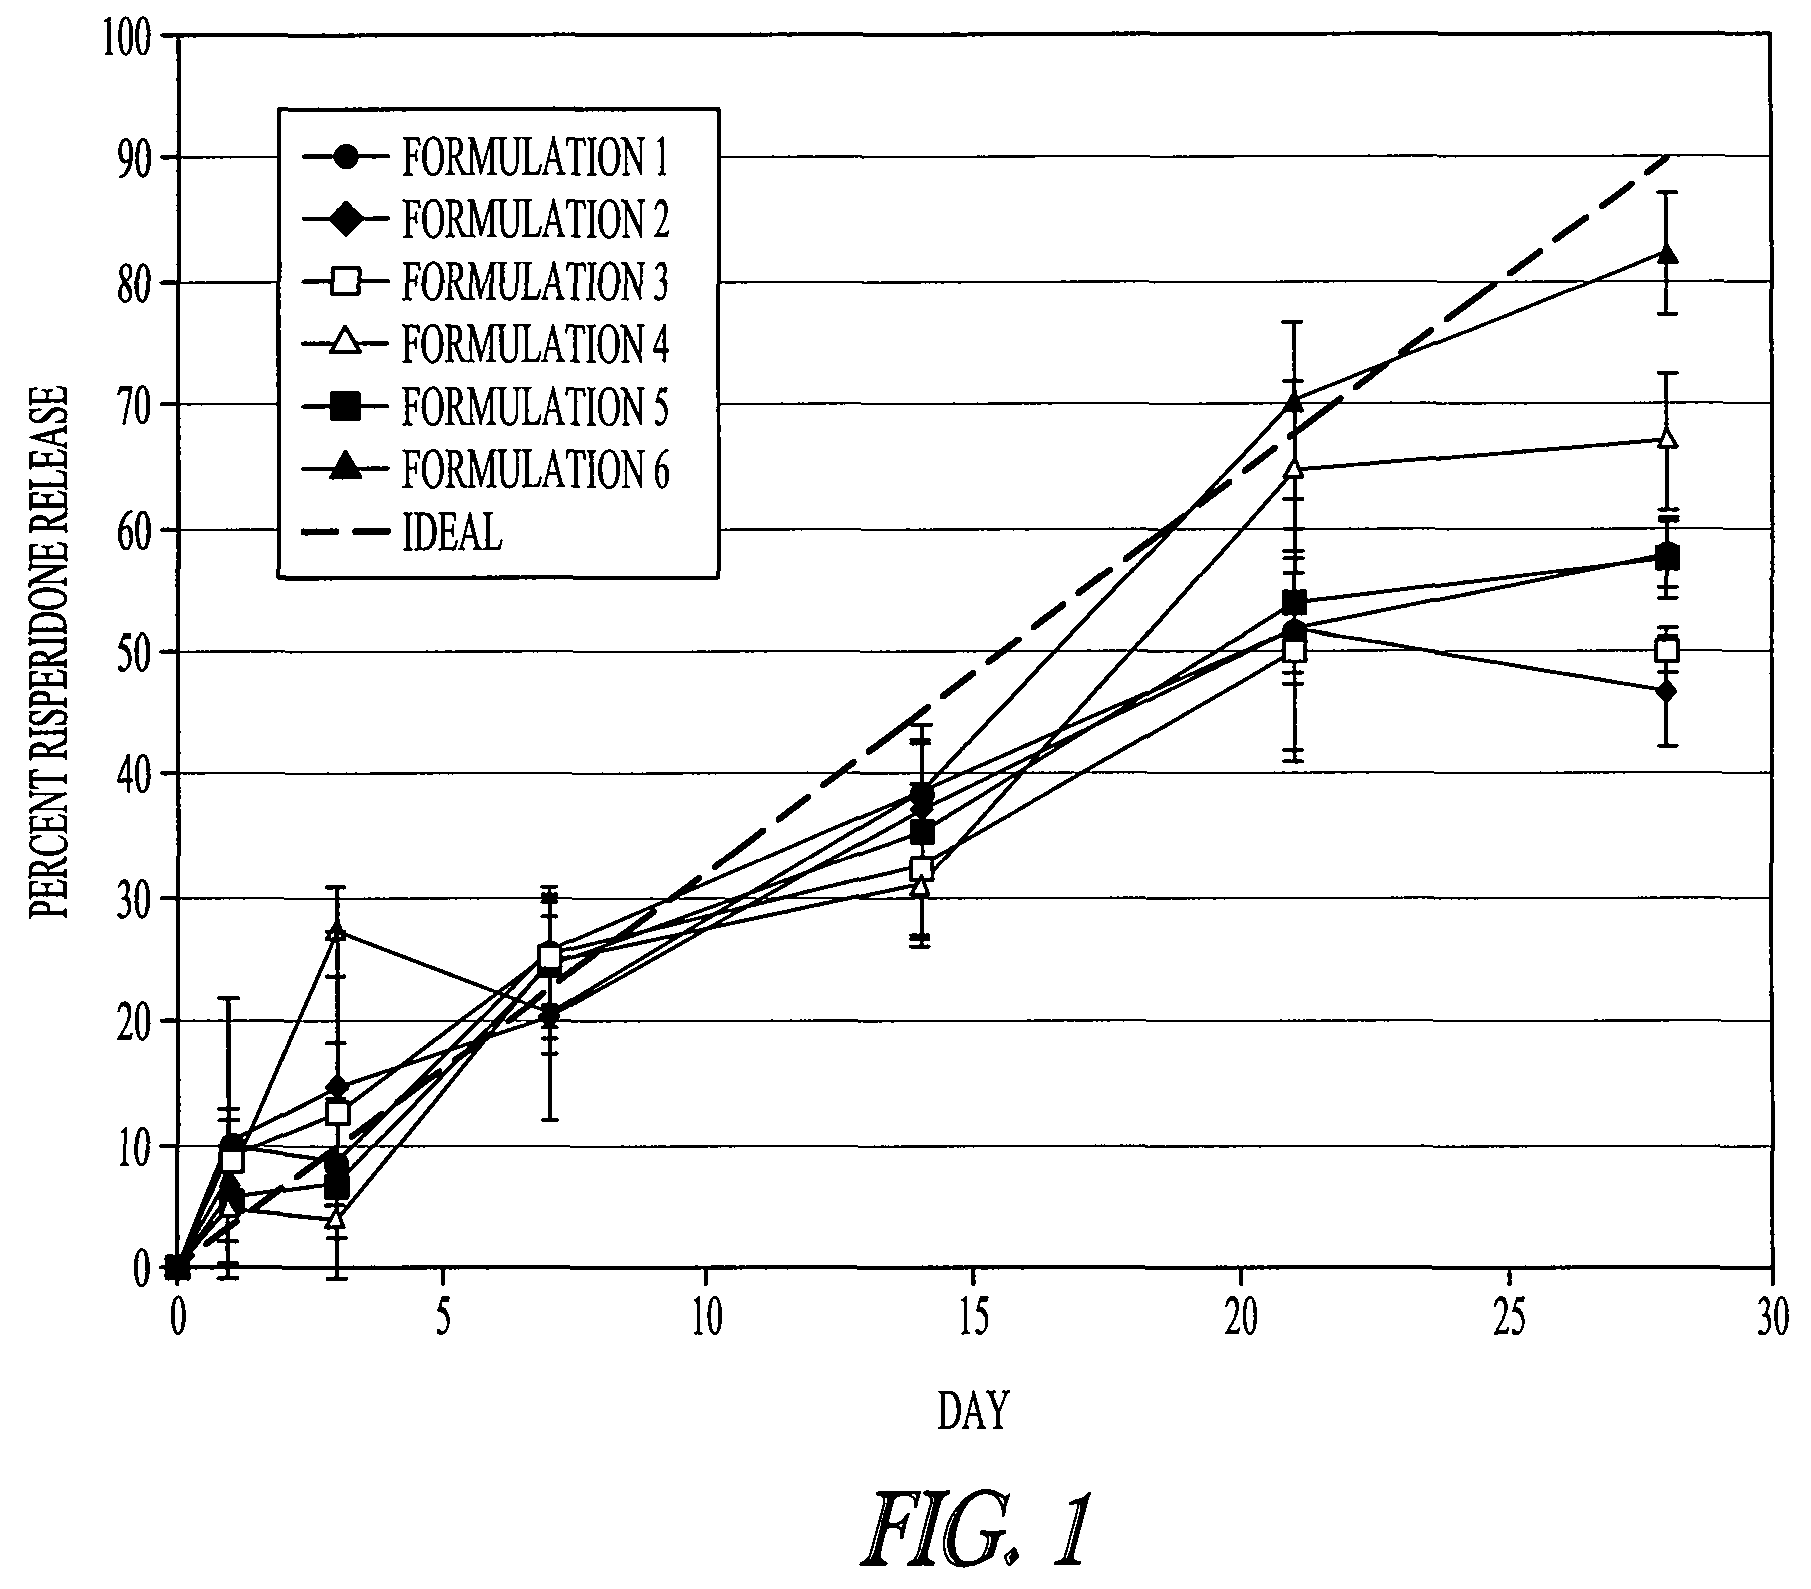 Controlled release copolymer formulation with improved release kinetics